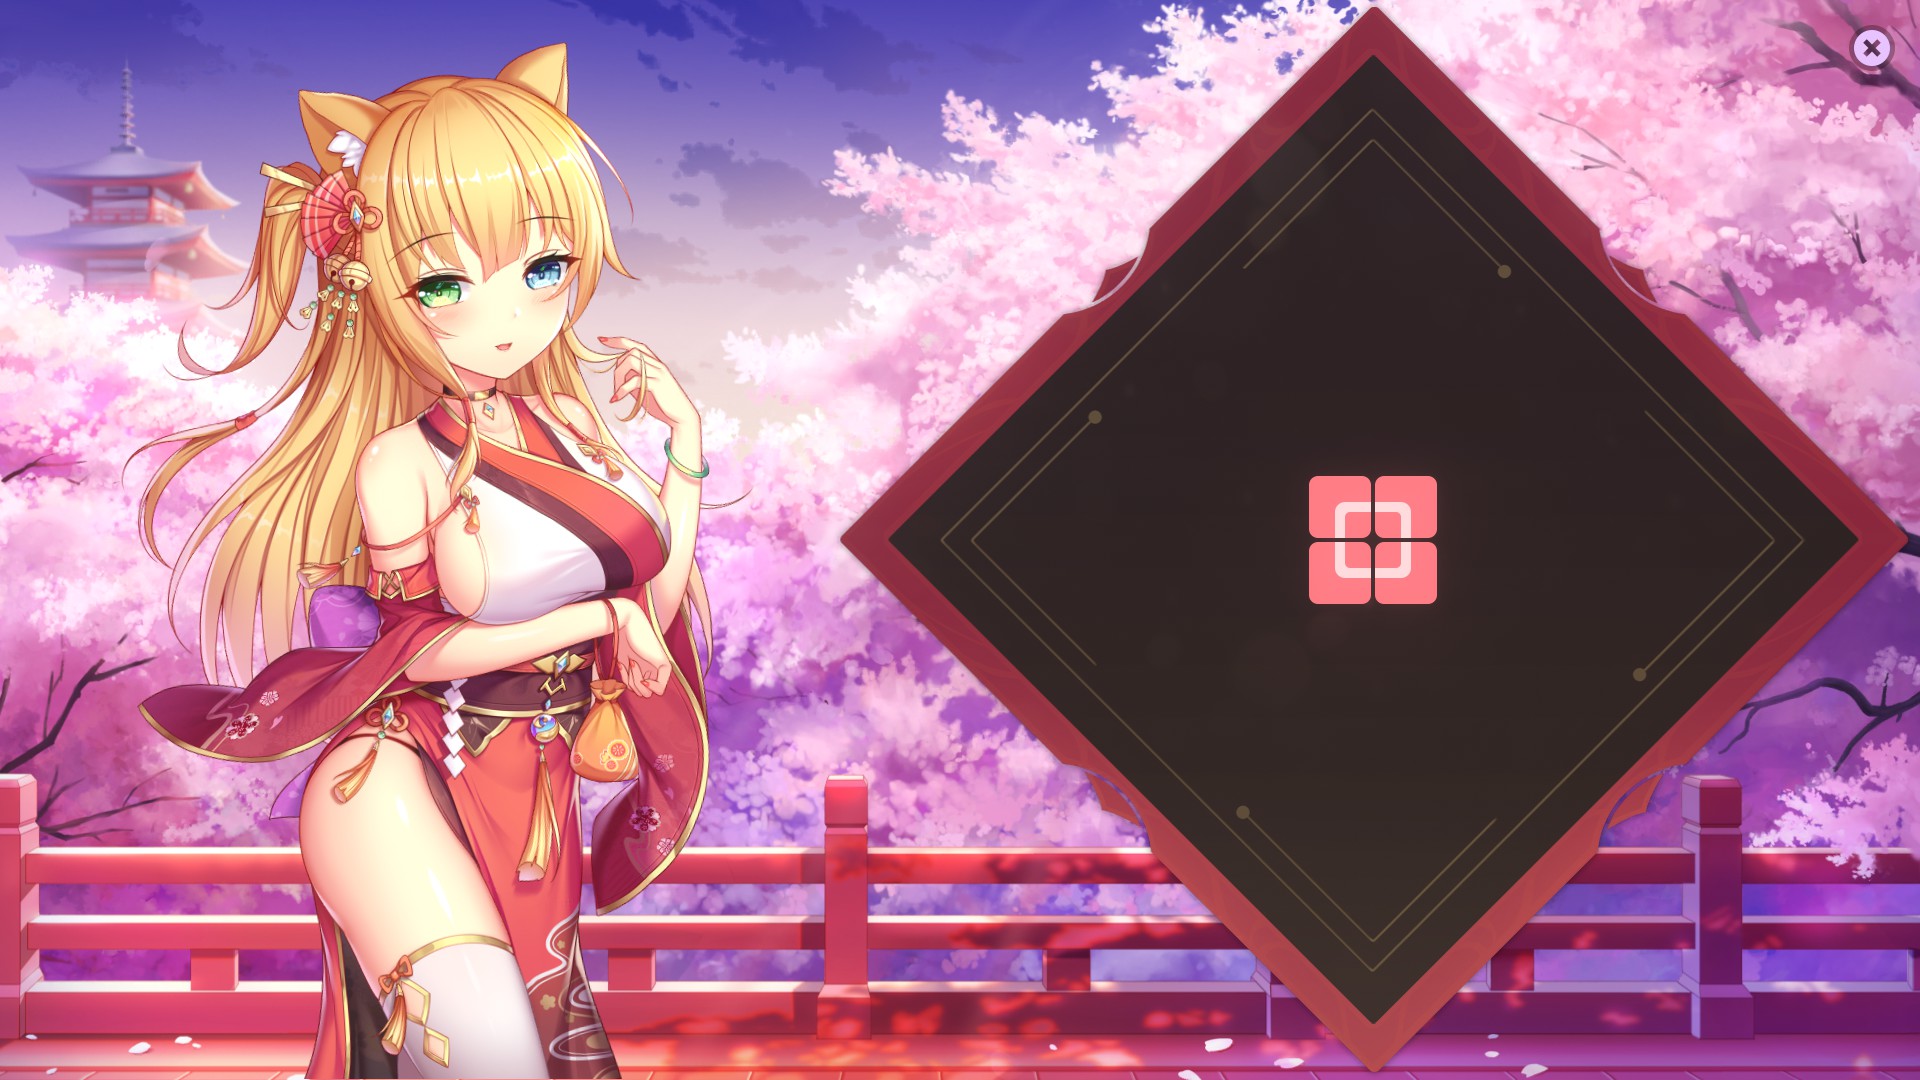 Sakura Hime 2 - Complete Achievement Guide +Walkthrough - Images of completed levels - FD7056D